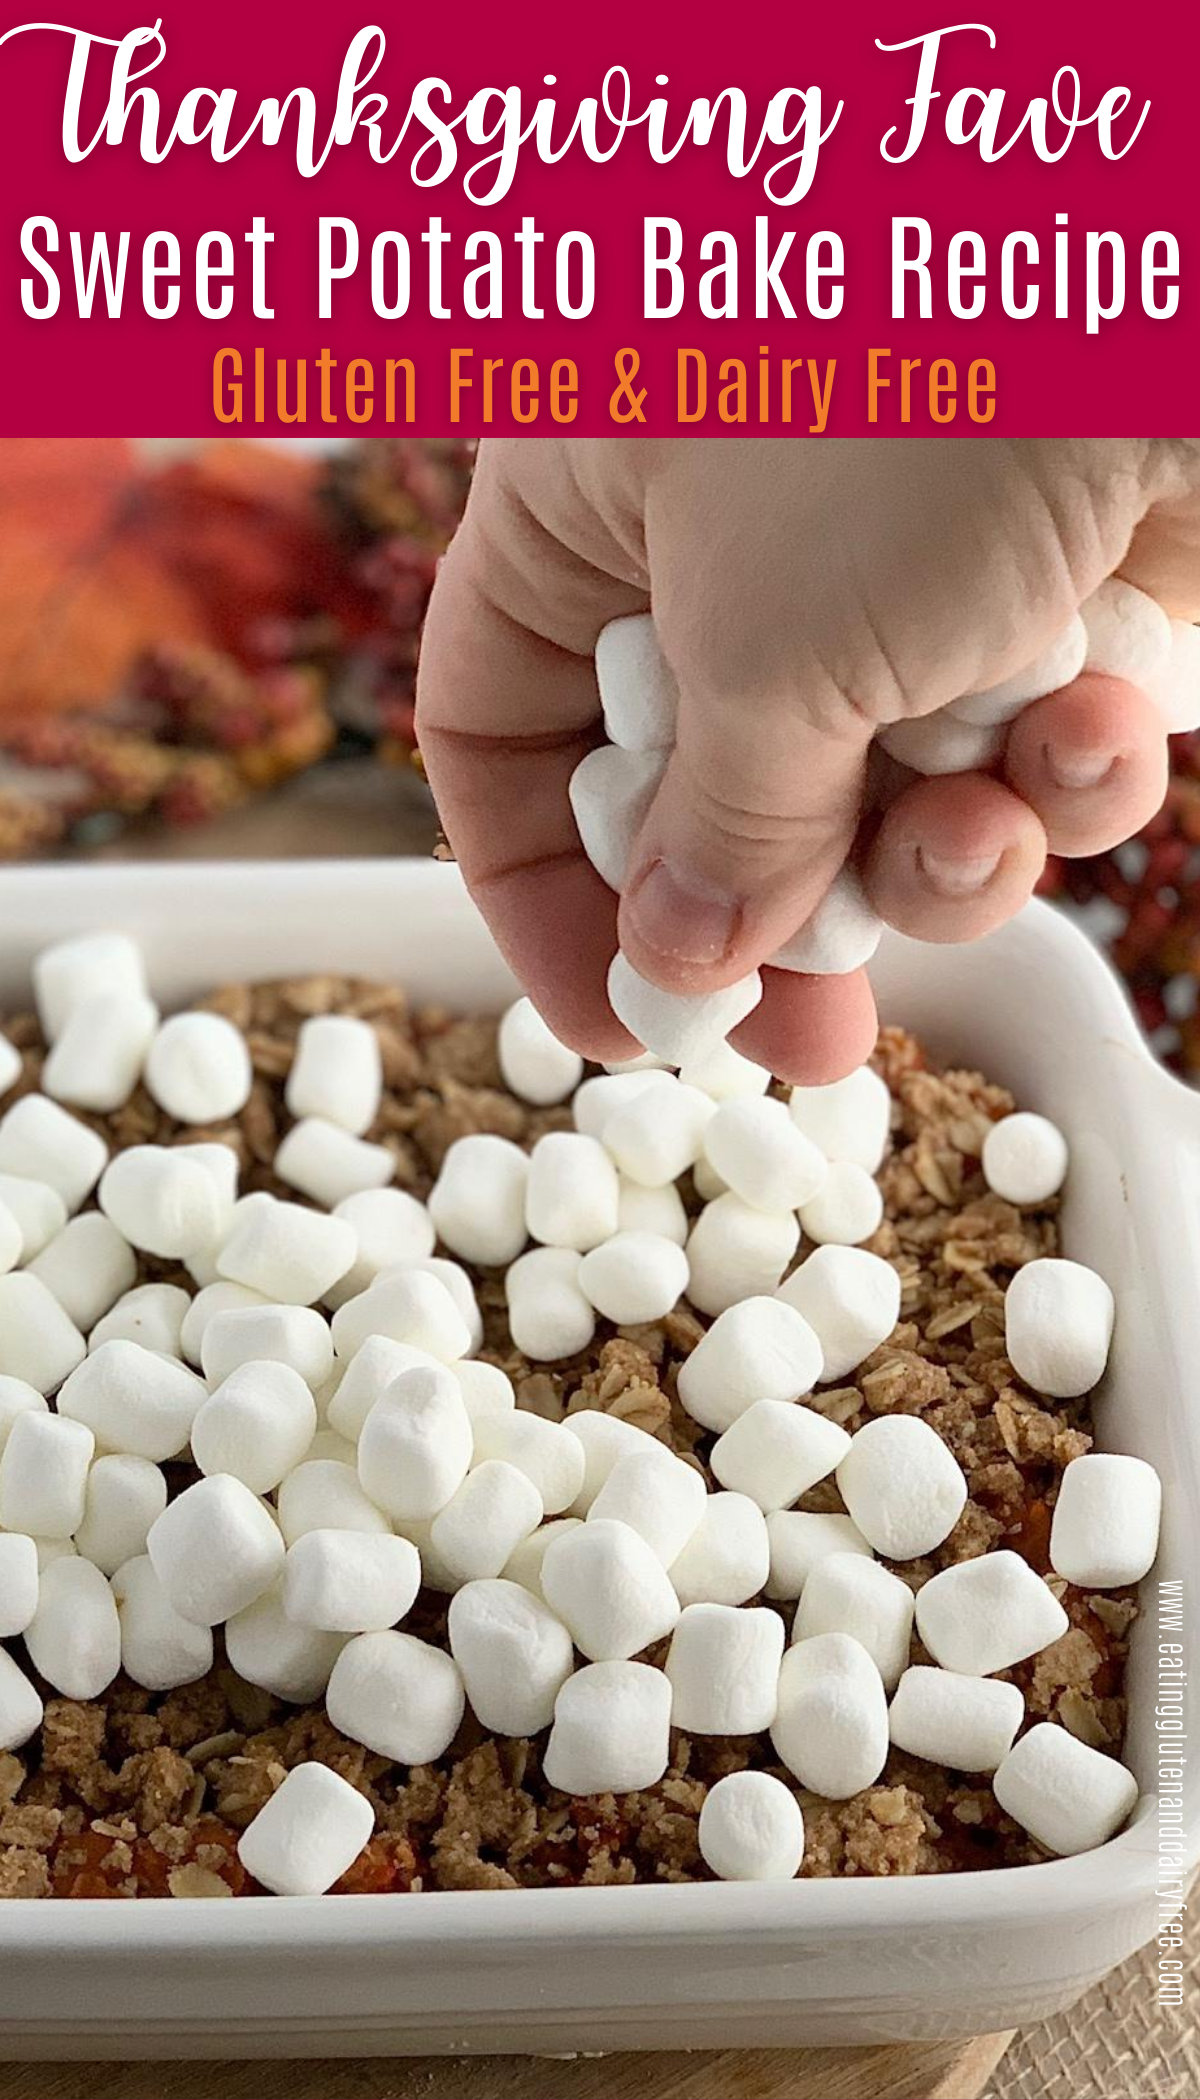 A hand dropping marshmallows on top of a sweet potato bake dish.